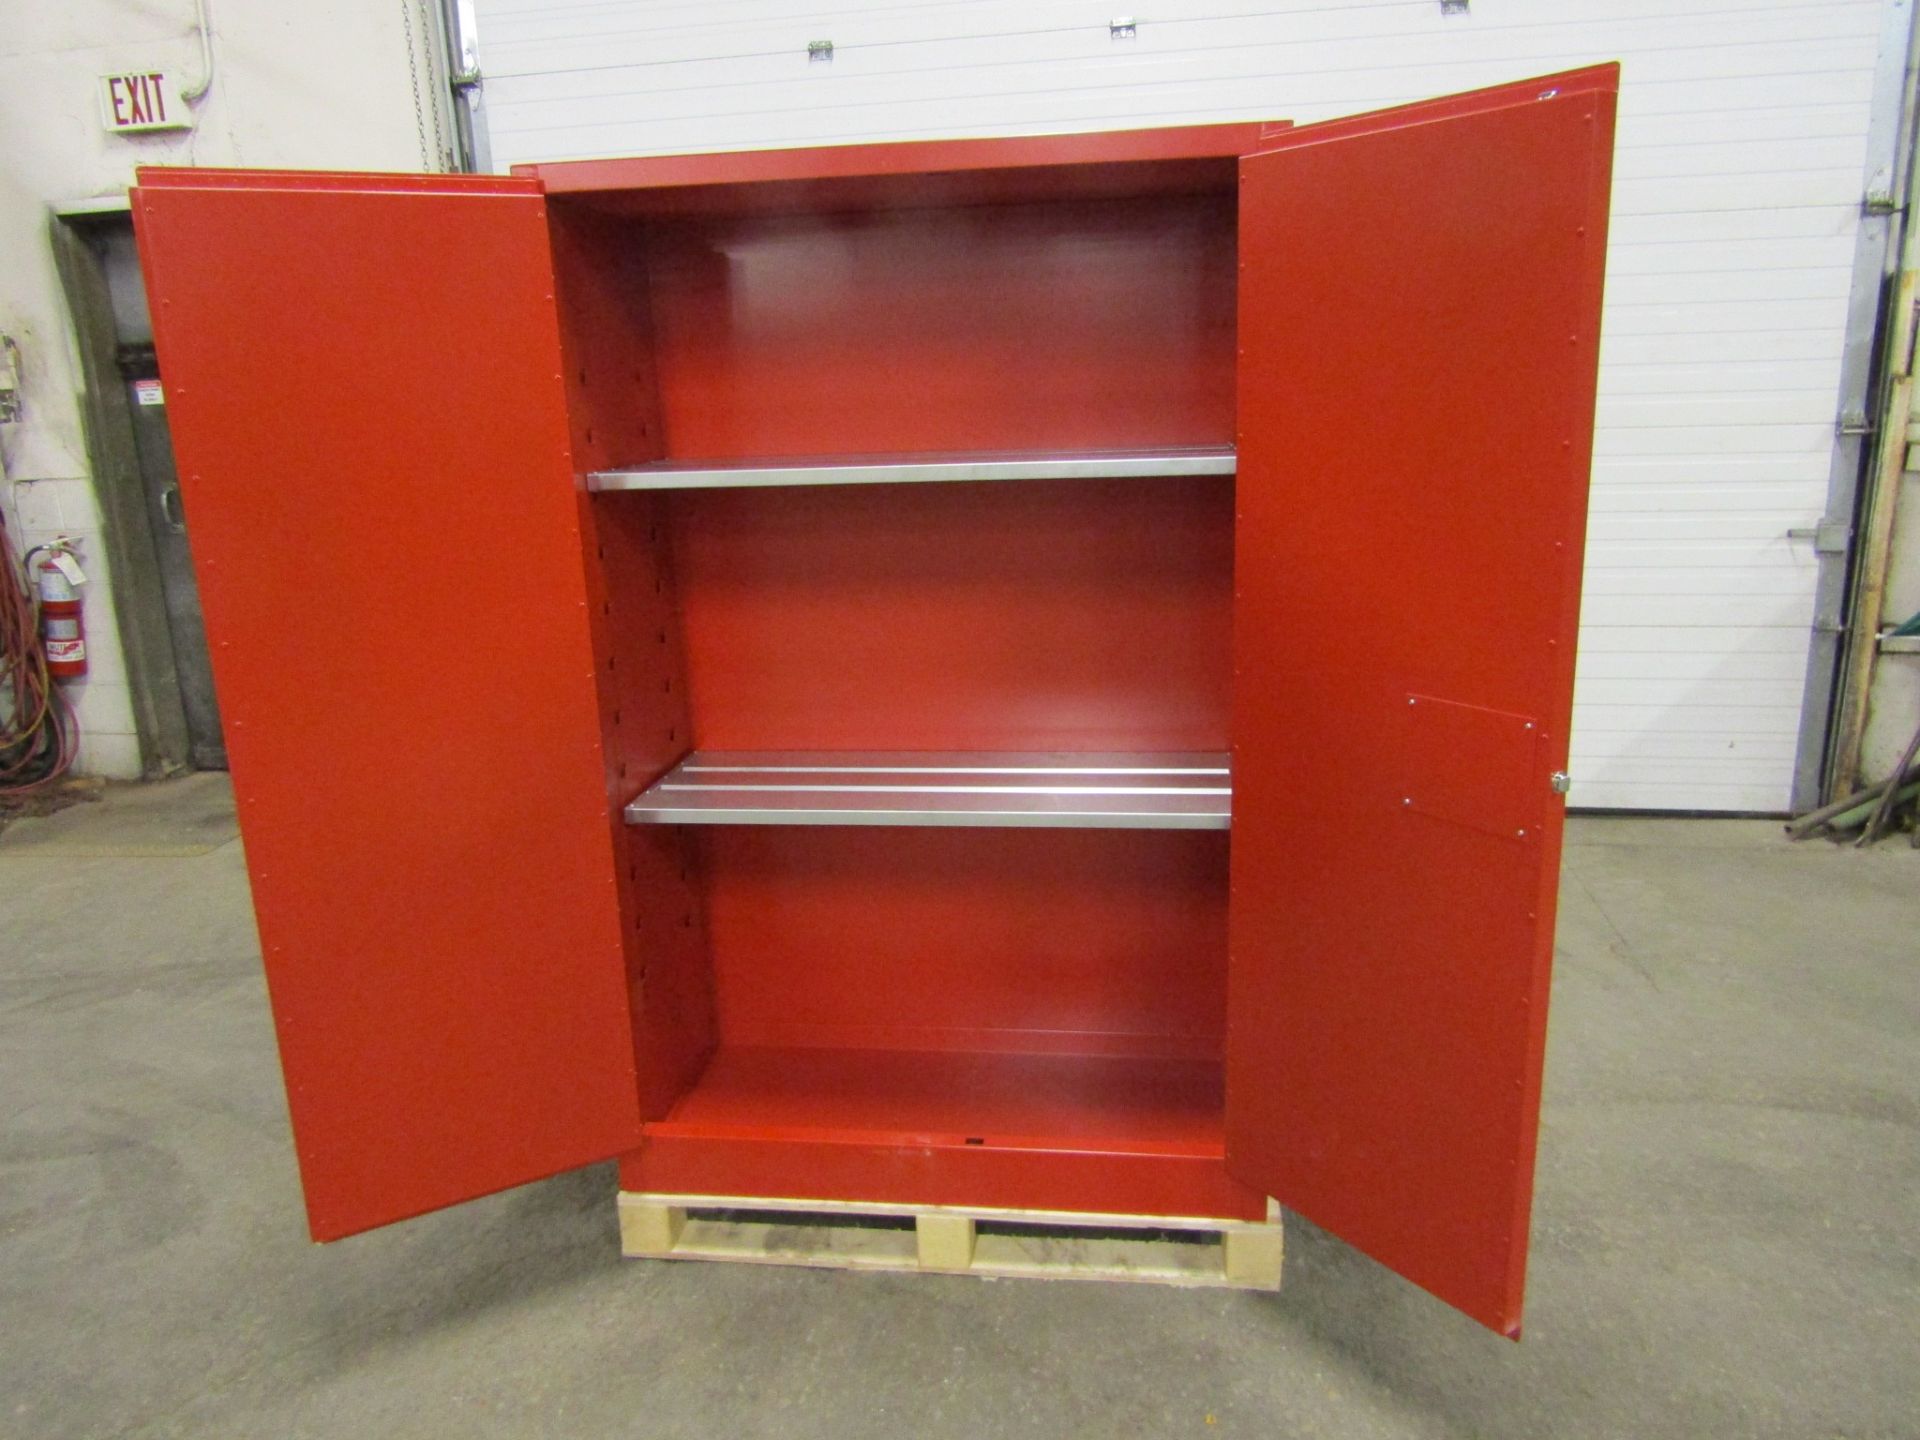 MINT Flammable Safety Fire cabinet with 2 shelves storage with LOCK - Image 2 of 2